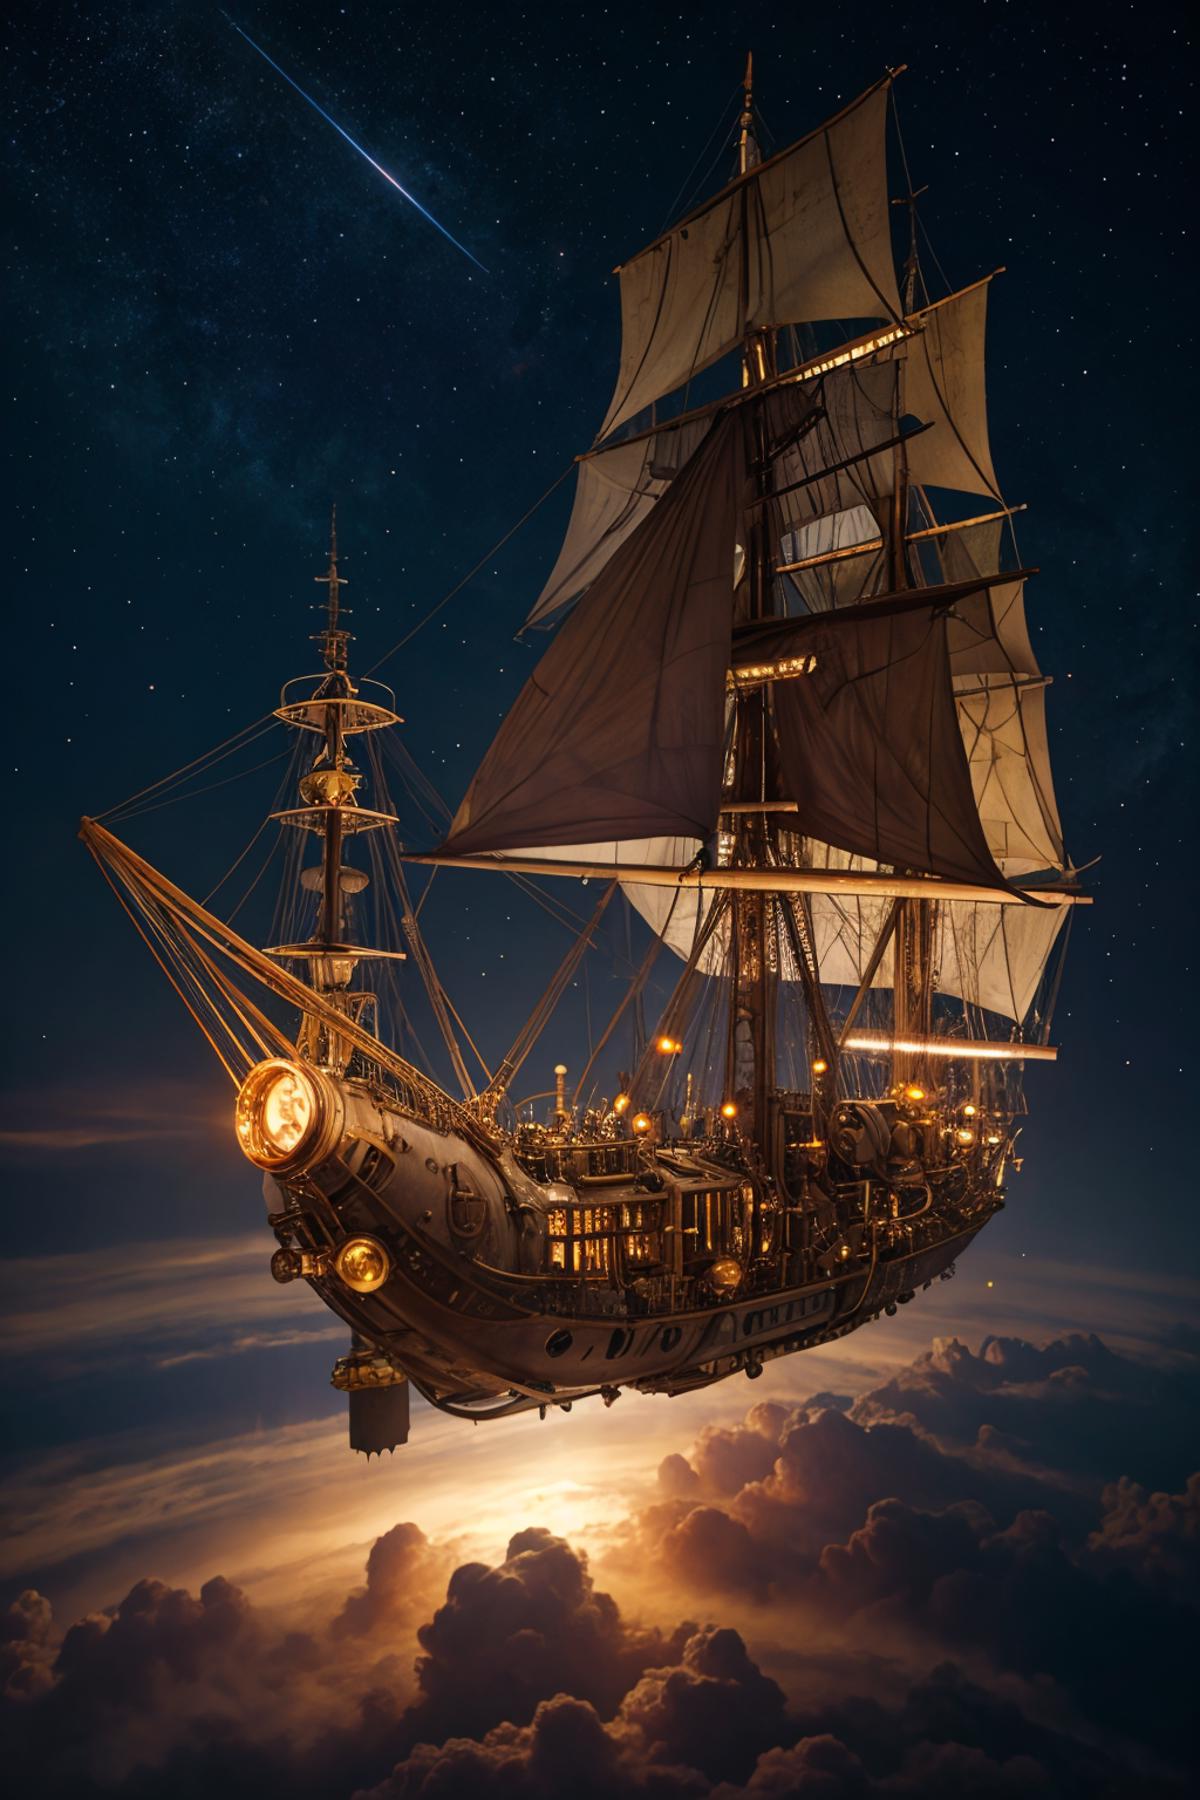 A pirate ship sailing in the night sky with sails and lights.